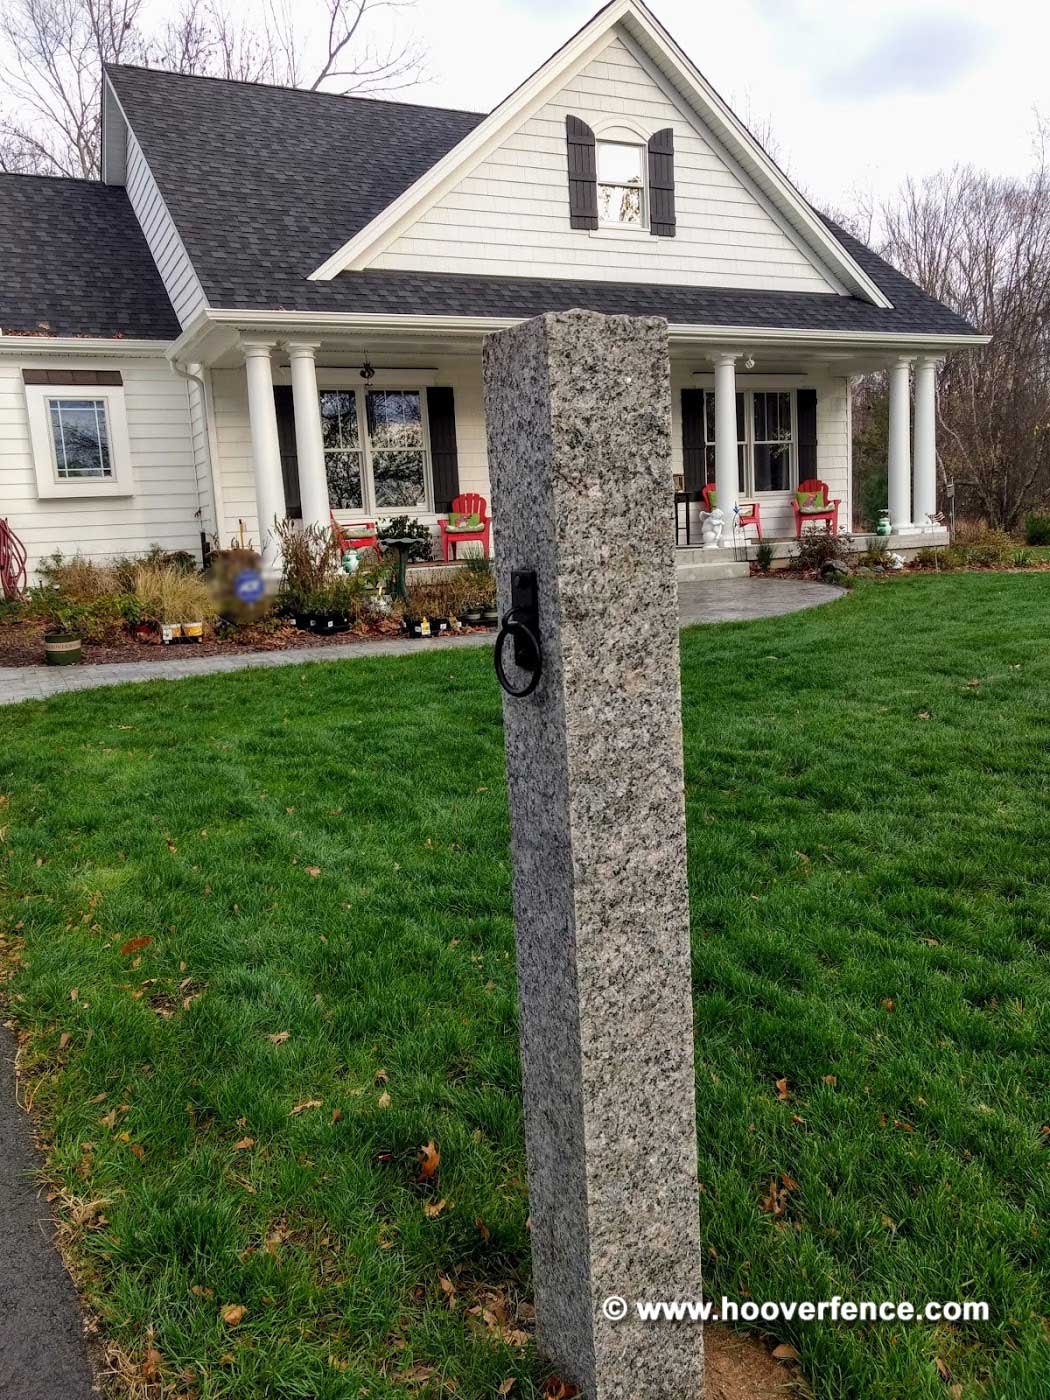 Customer Install - Snug Cottage 3900-00SP Hitching Post Ring on Plate Installed on Caledonian Granite Post